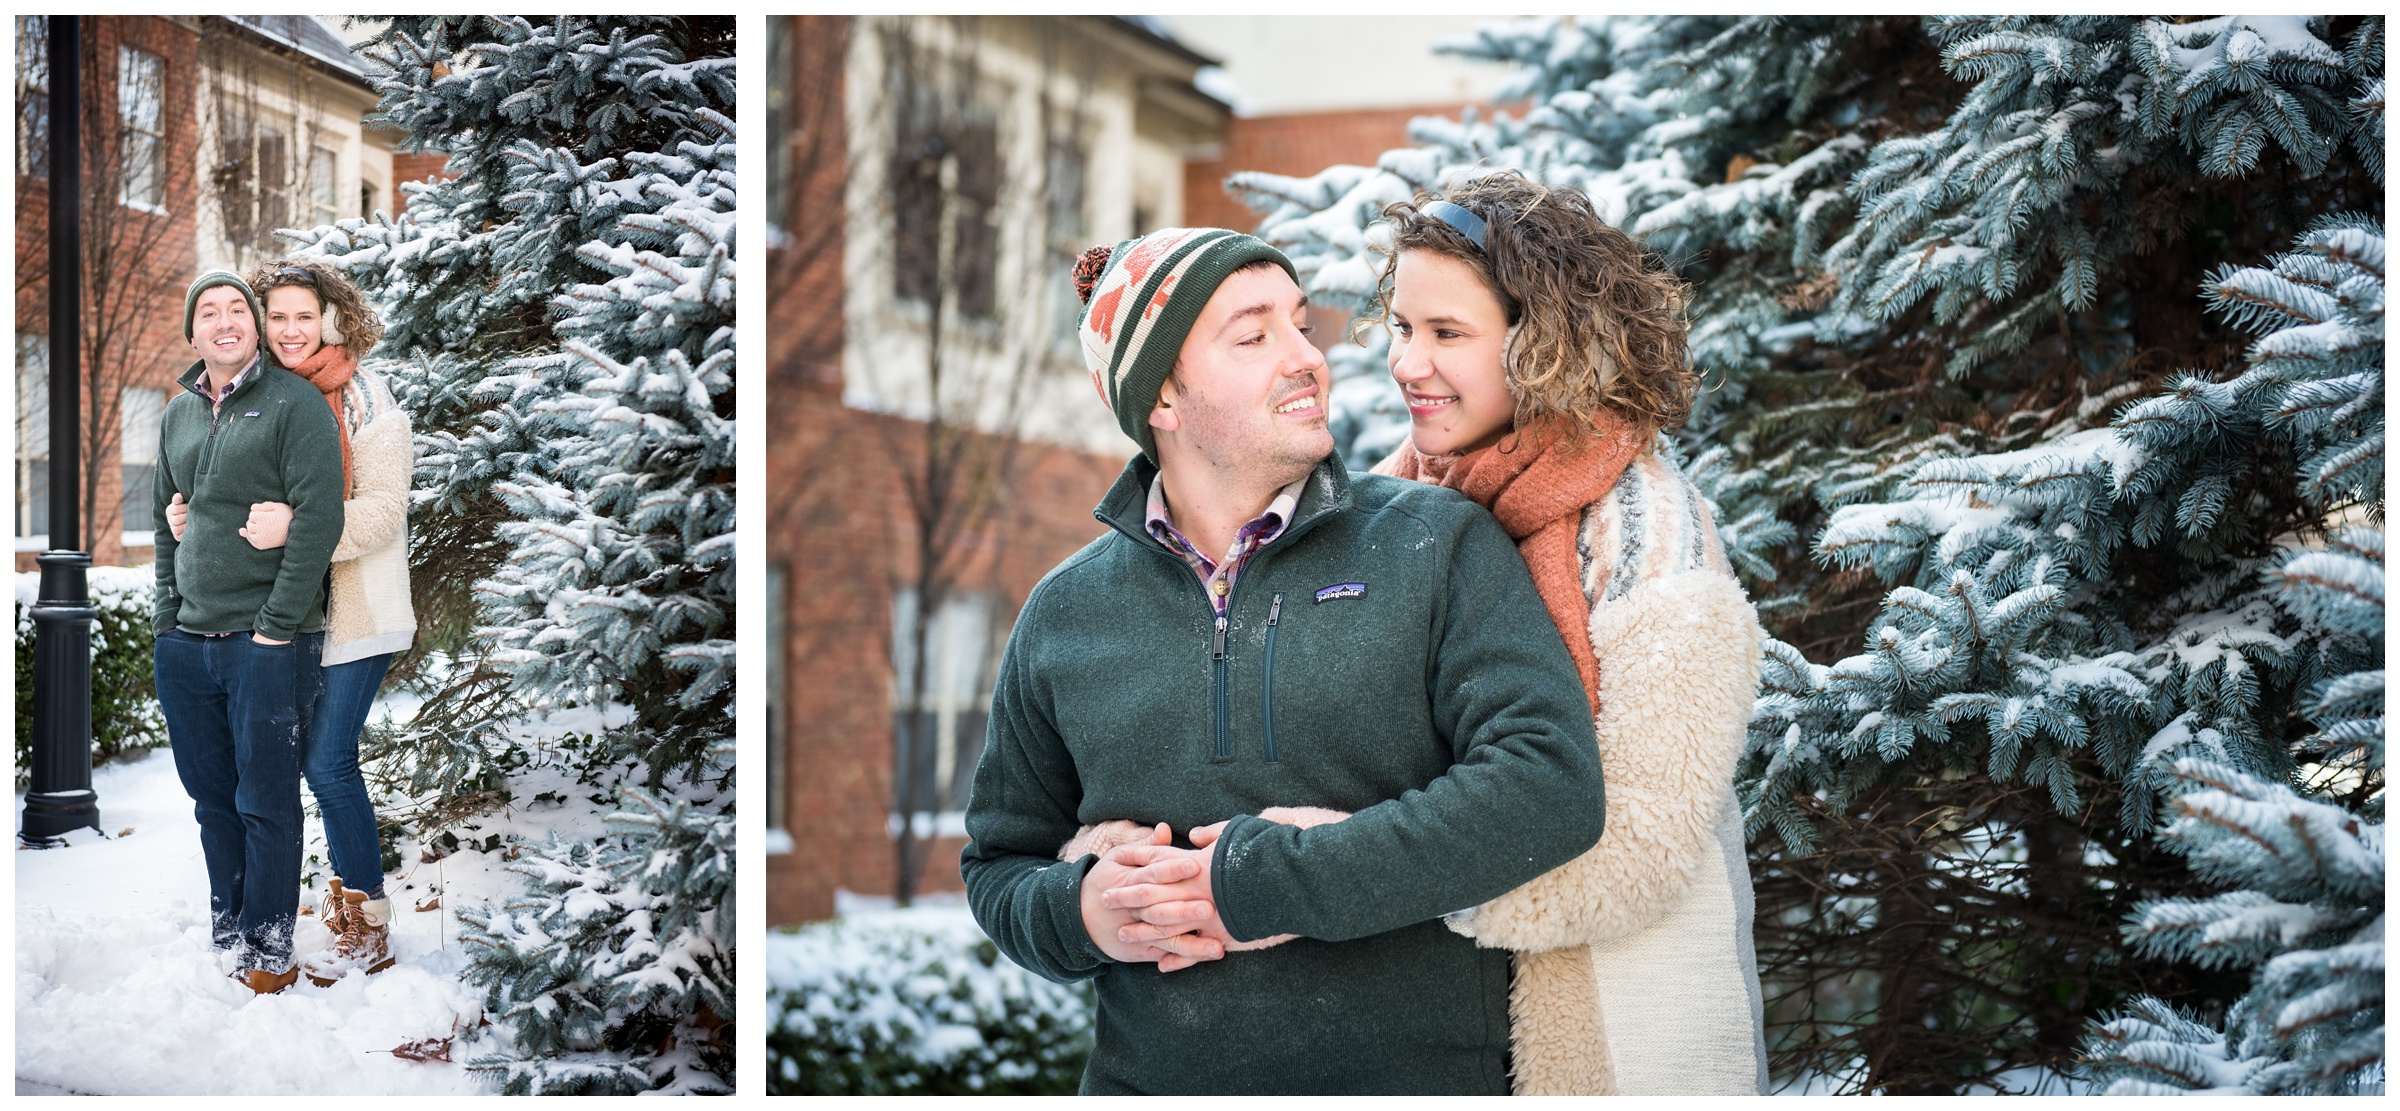 snowy engagement photos in the Short North, Columbus, Ohio during winter